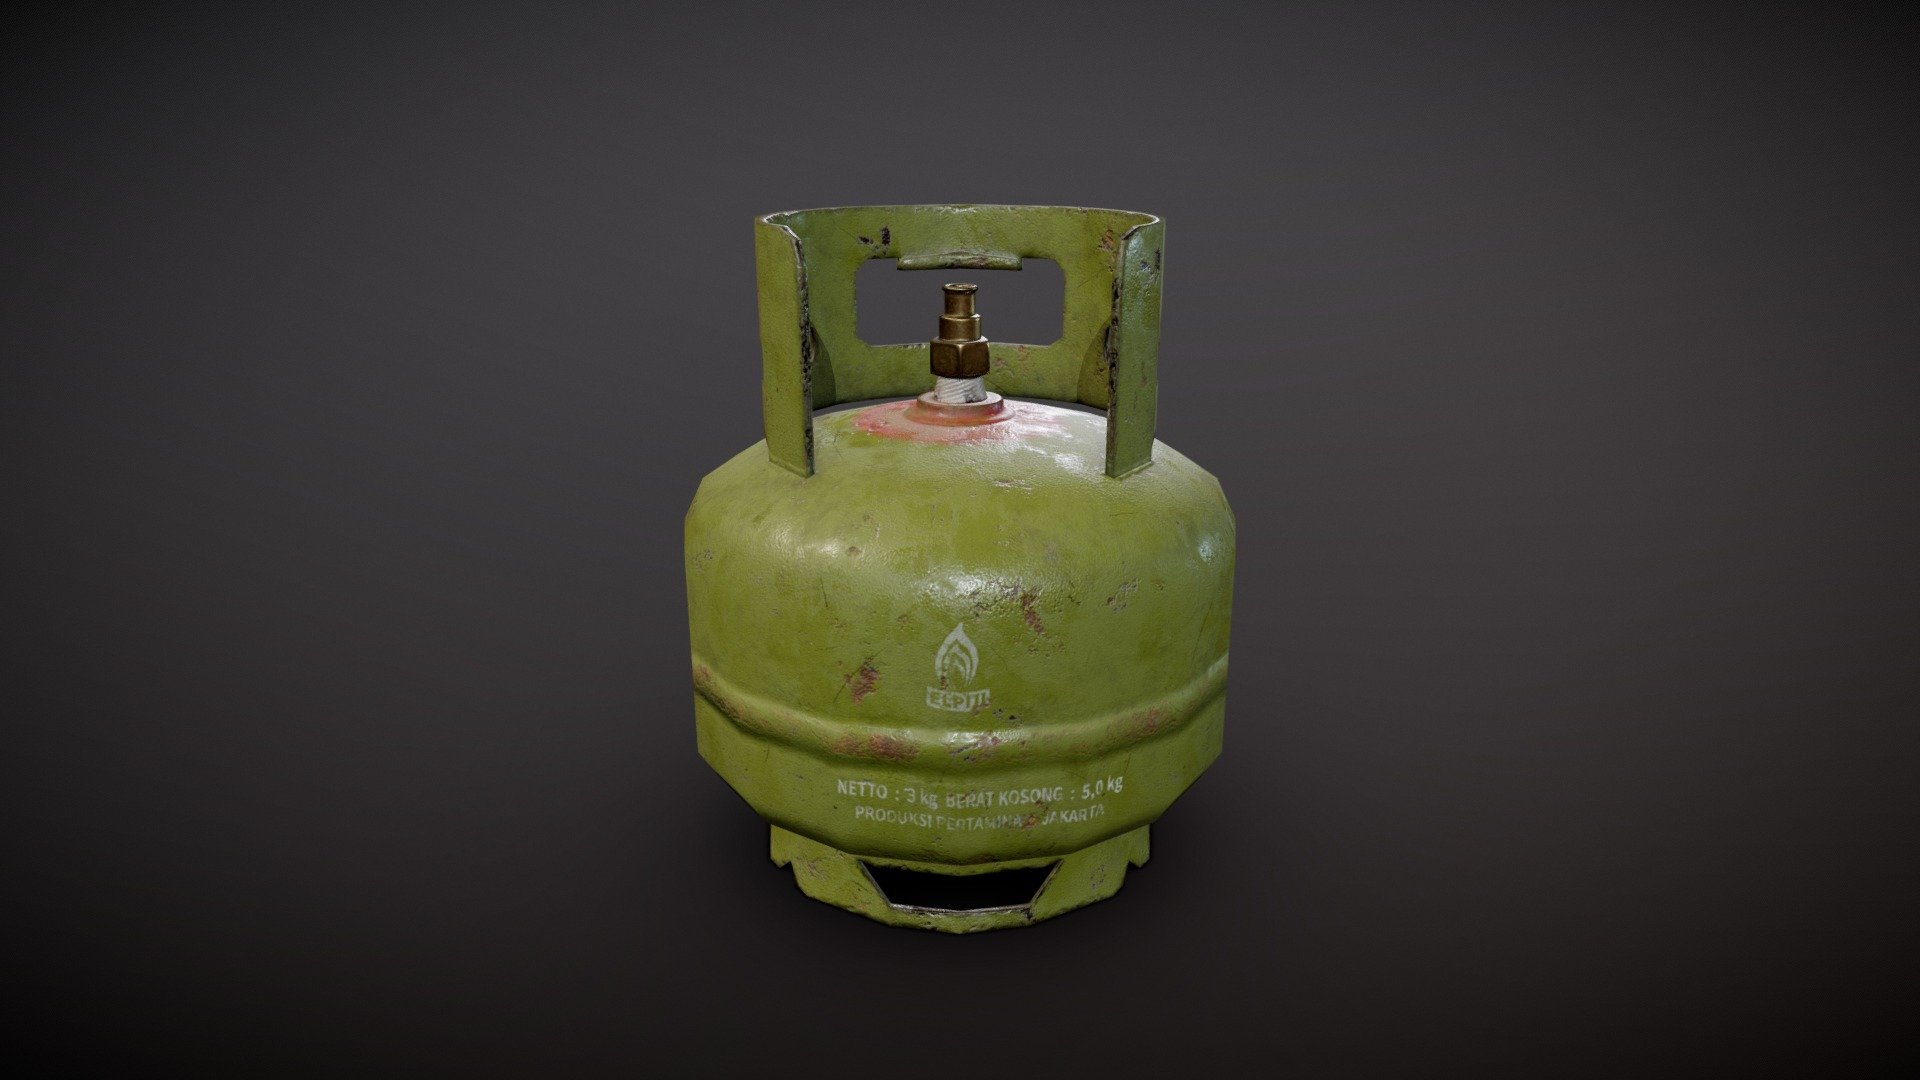 Indonesian LPG gas tank
based on real life product

1668 TRIS
2K texture, 5 maps (Albedo, Metalic, Roughness, Normal, AO)

I made this to learn about game assets - LPG Gas Tank 3kg - 3D model by aprillioalbert 3d model